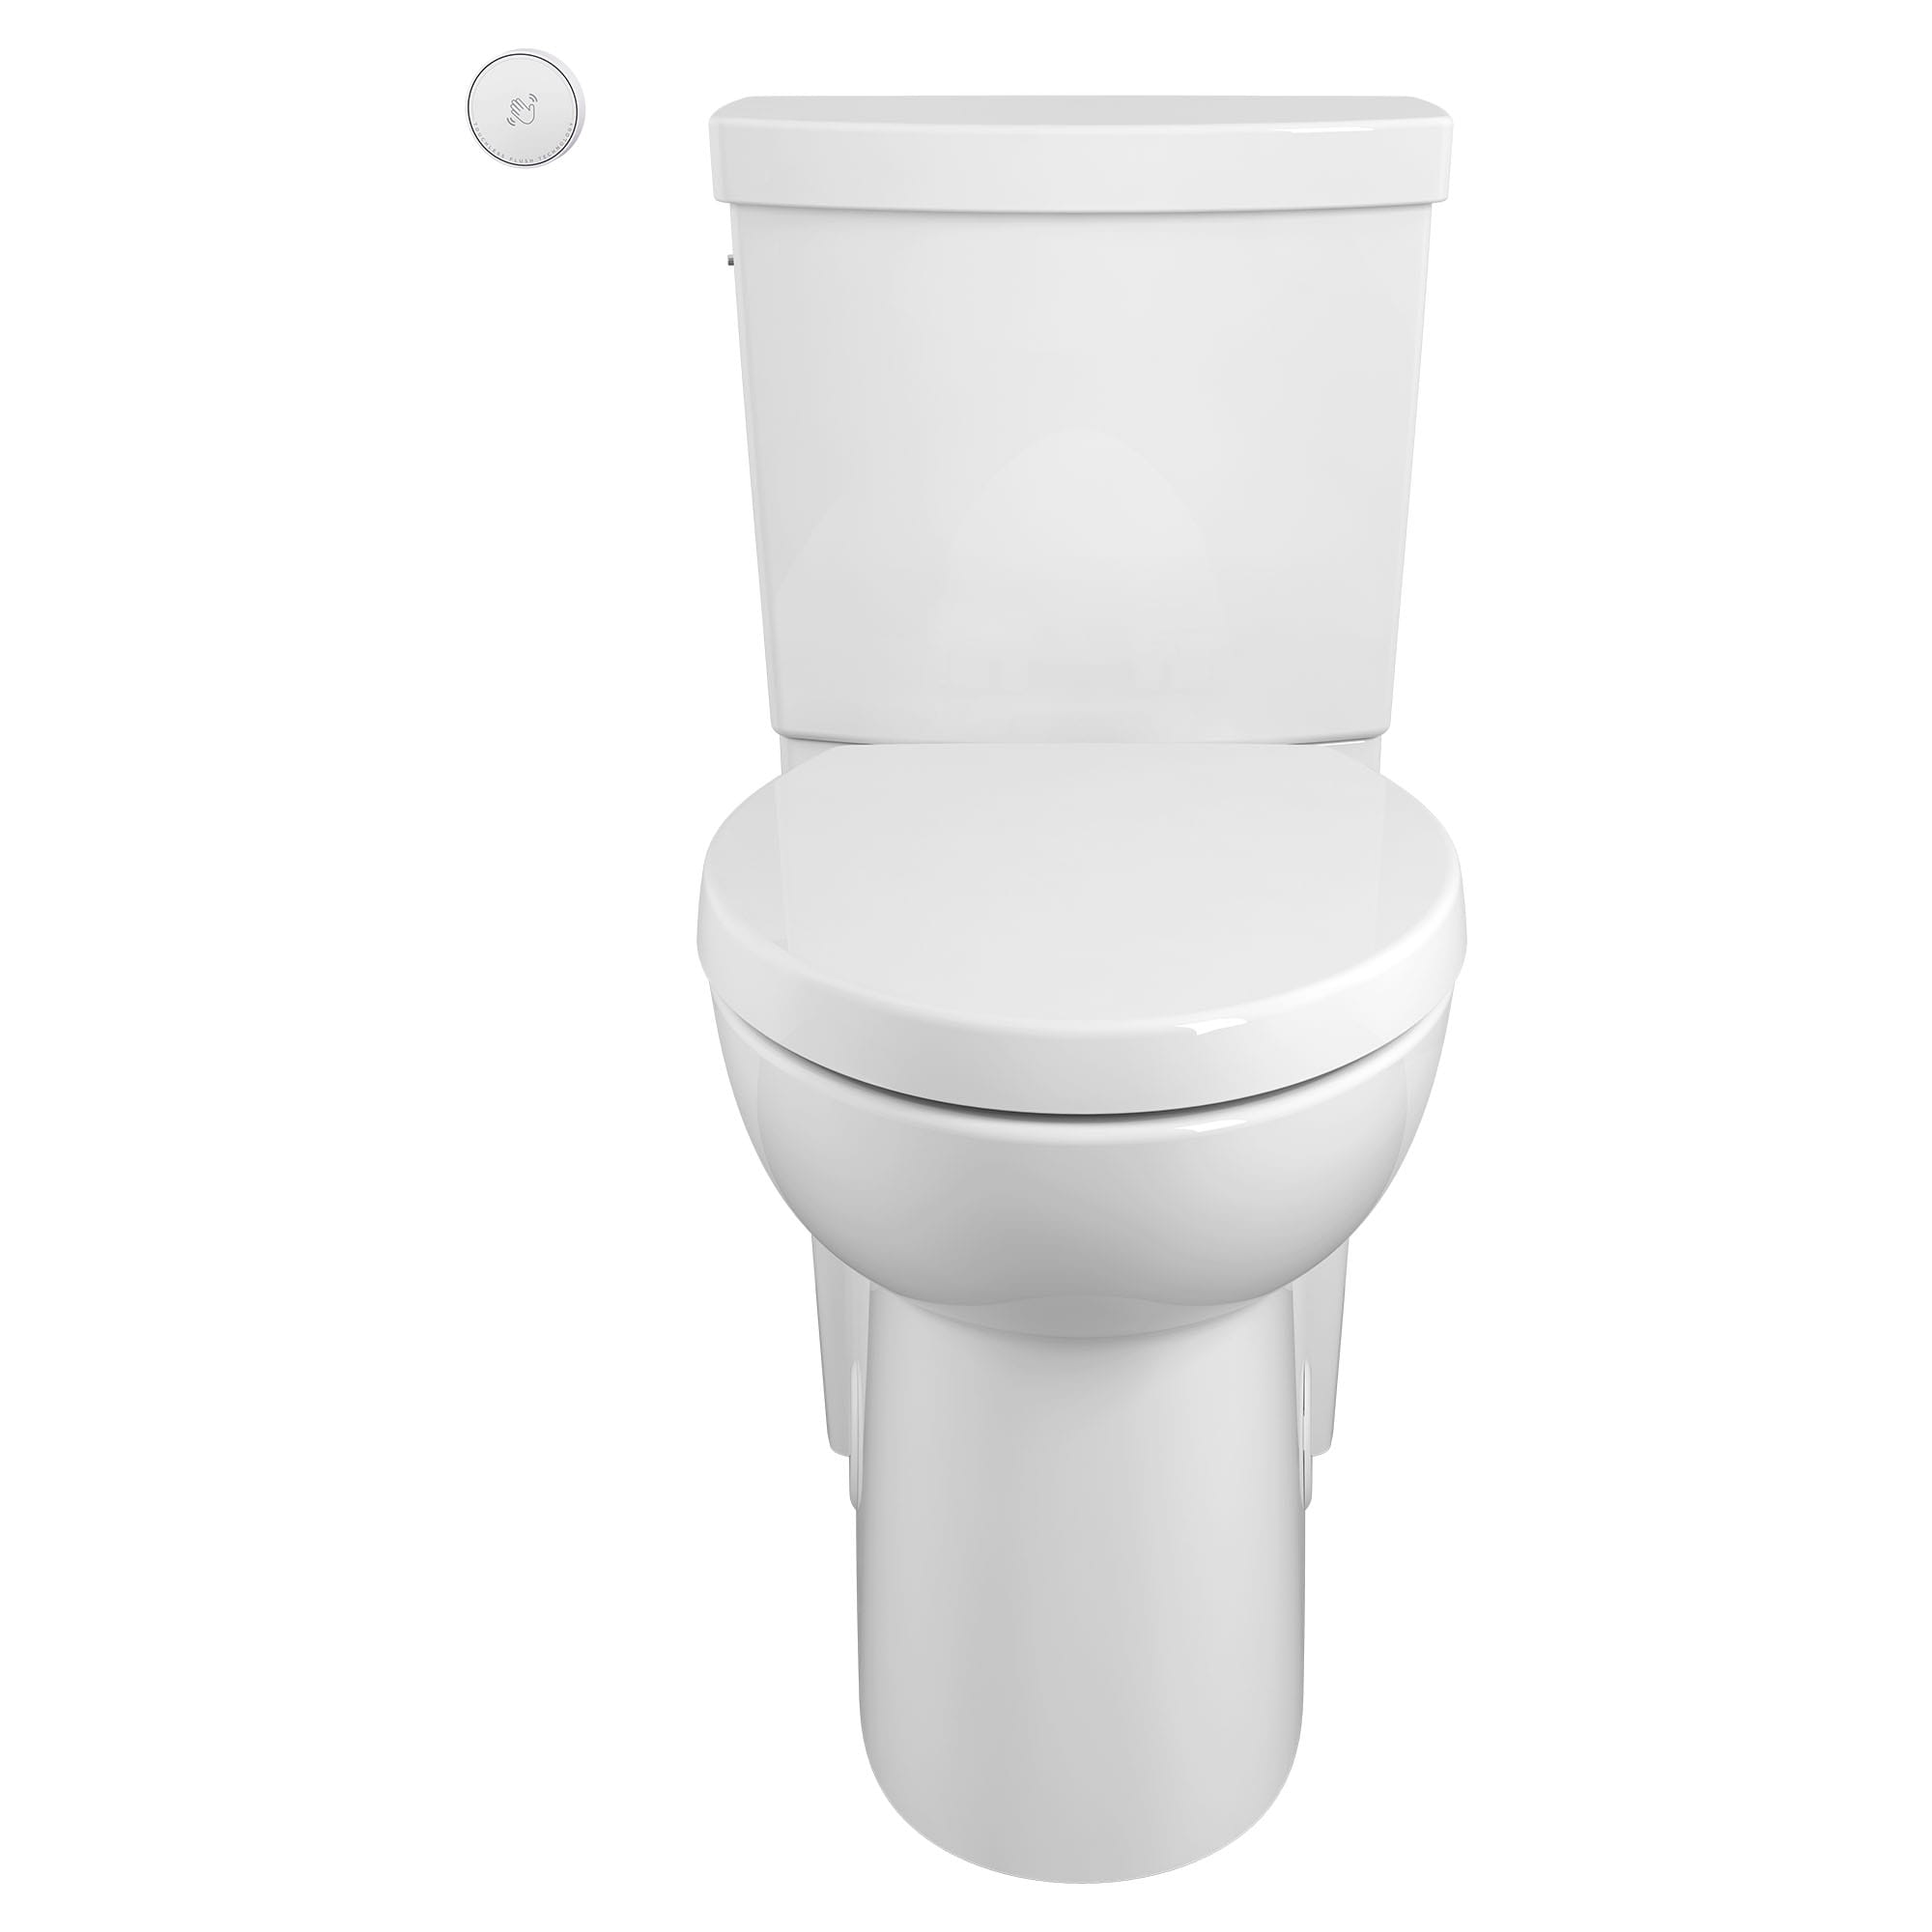 2 Piece American Standard 2794119.020 Studio Activate Touchless Right Height Elongated Concealed Trapway 1.28 GPF Toilet White 